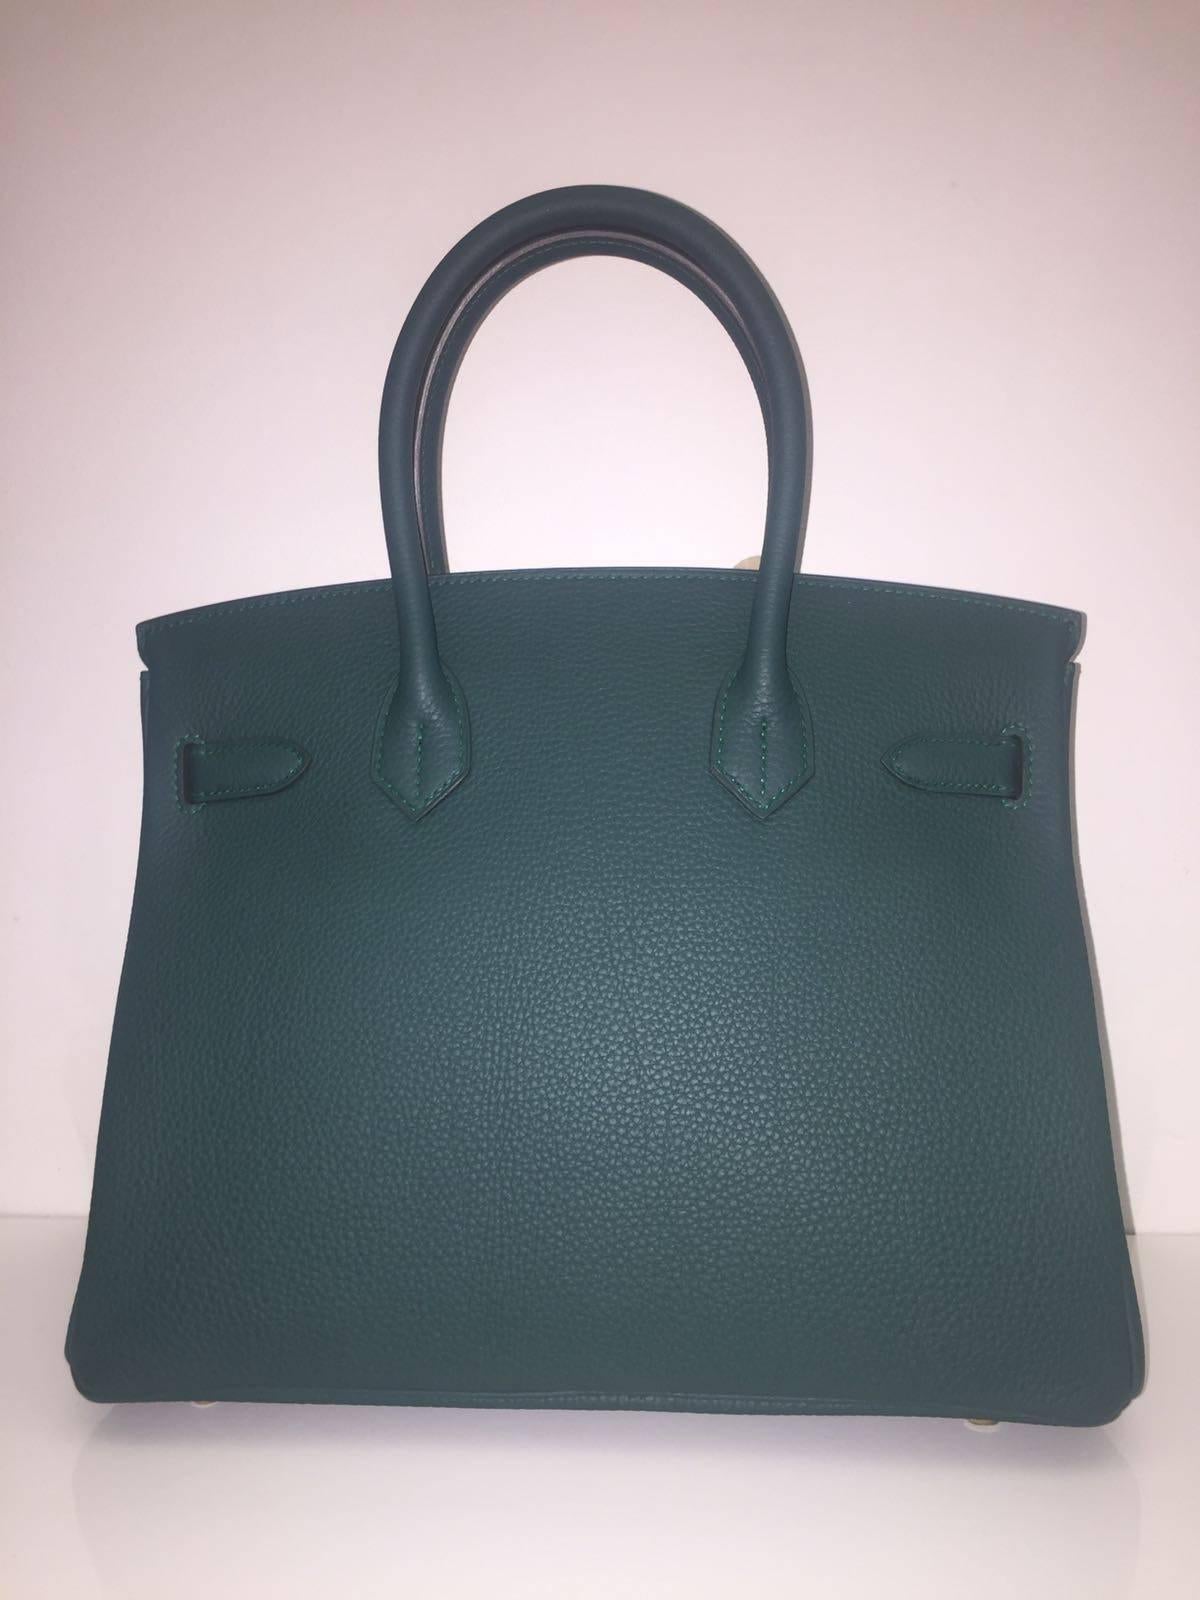 Hermes 
Birkin Size 30
Togo Leather 
Colour Green Malachite
Gold Hardware
store fresh, comes with receipt and full set (dust bag, box...) 
Hydeparkfashion specializes in sourcing and delivering authentic luxury handbags, mainly Hermes, to client